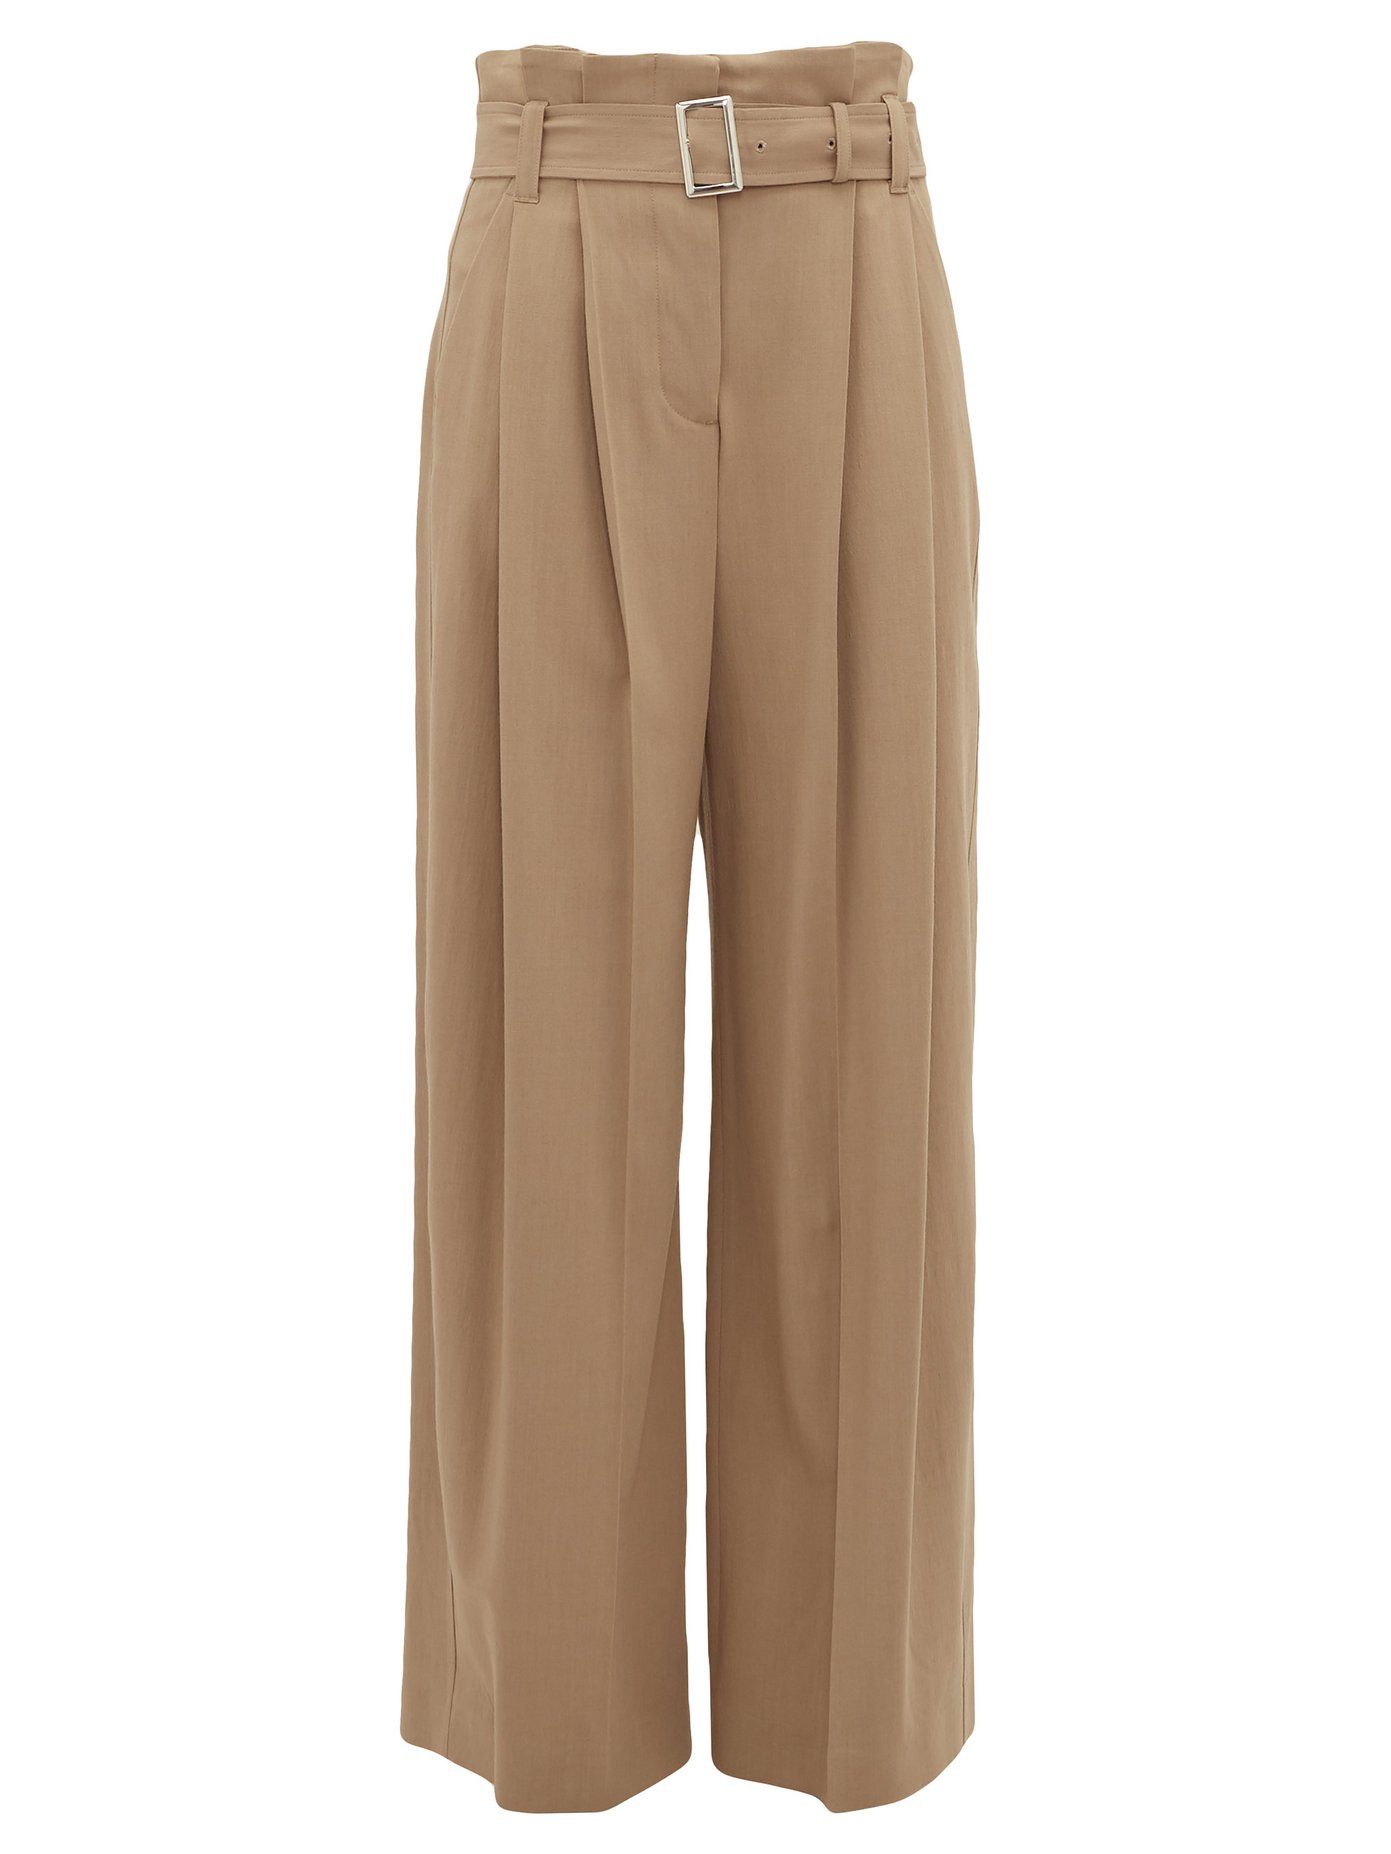 burberry wide leg trousers